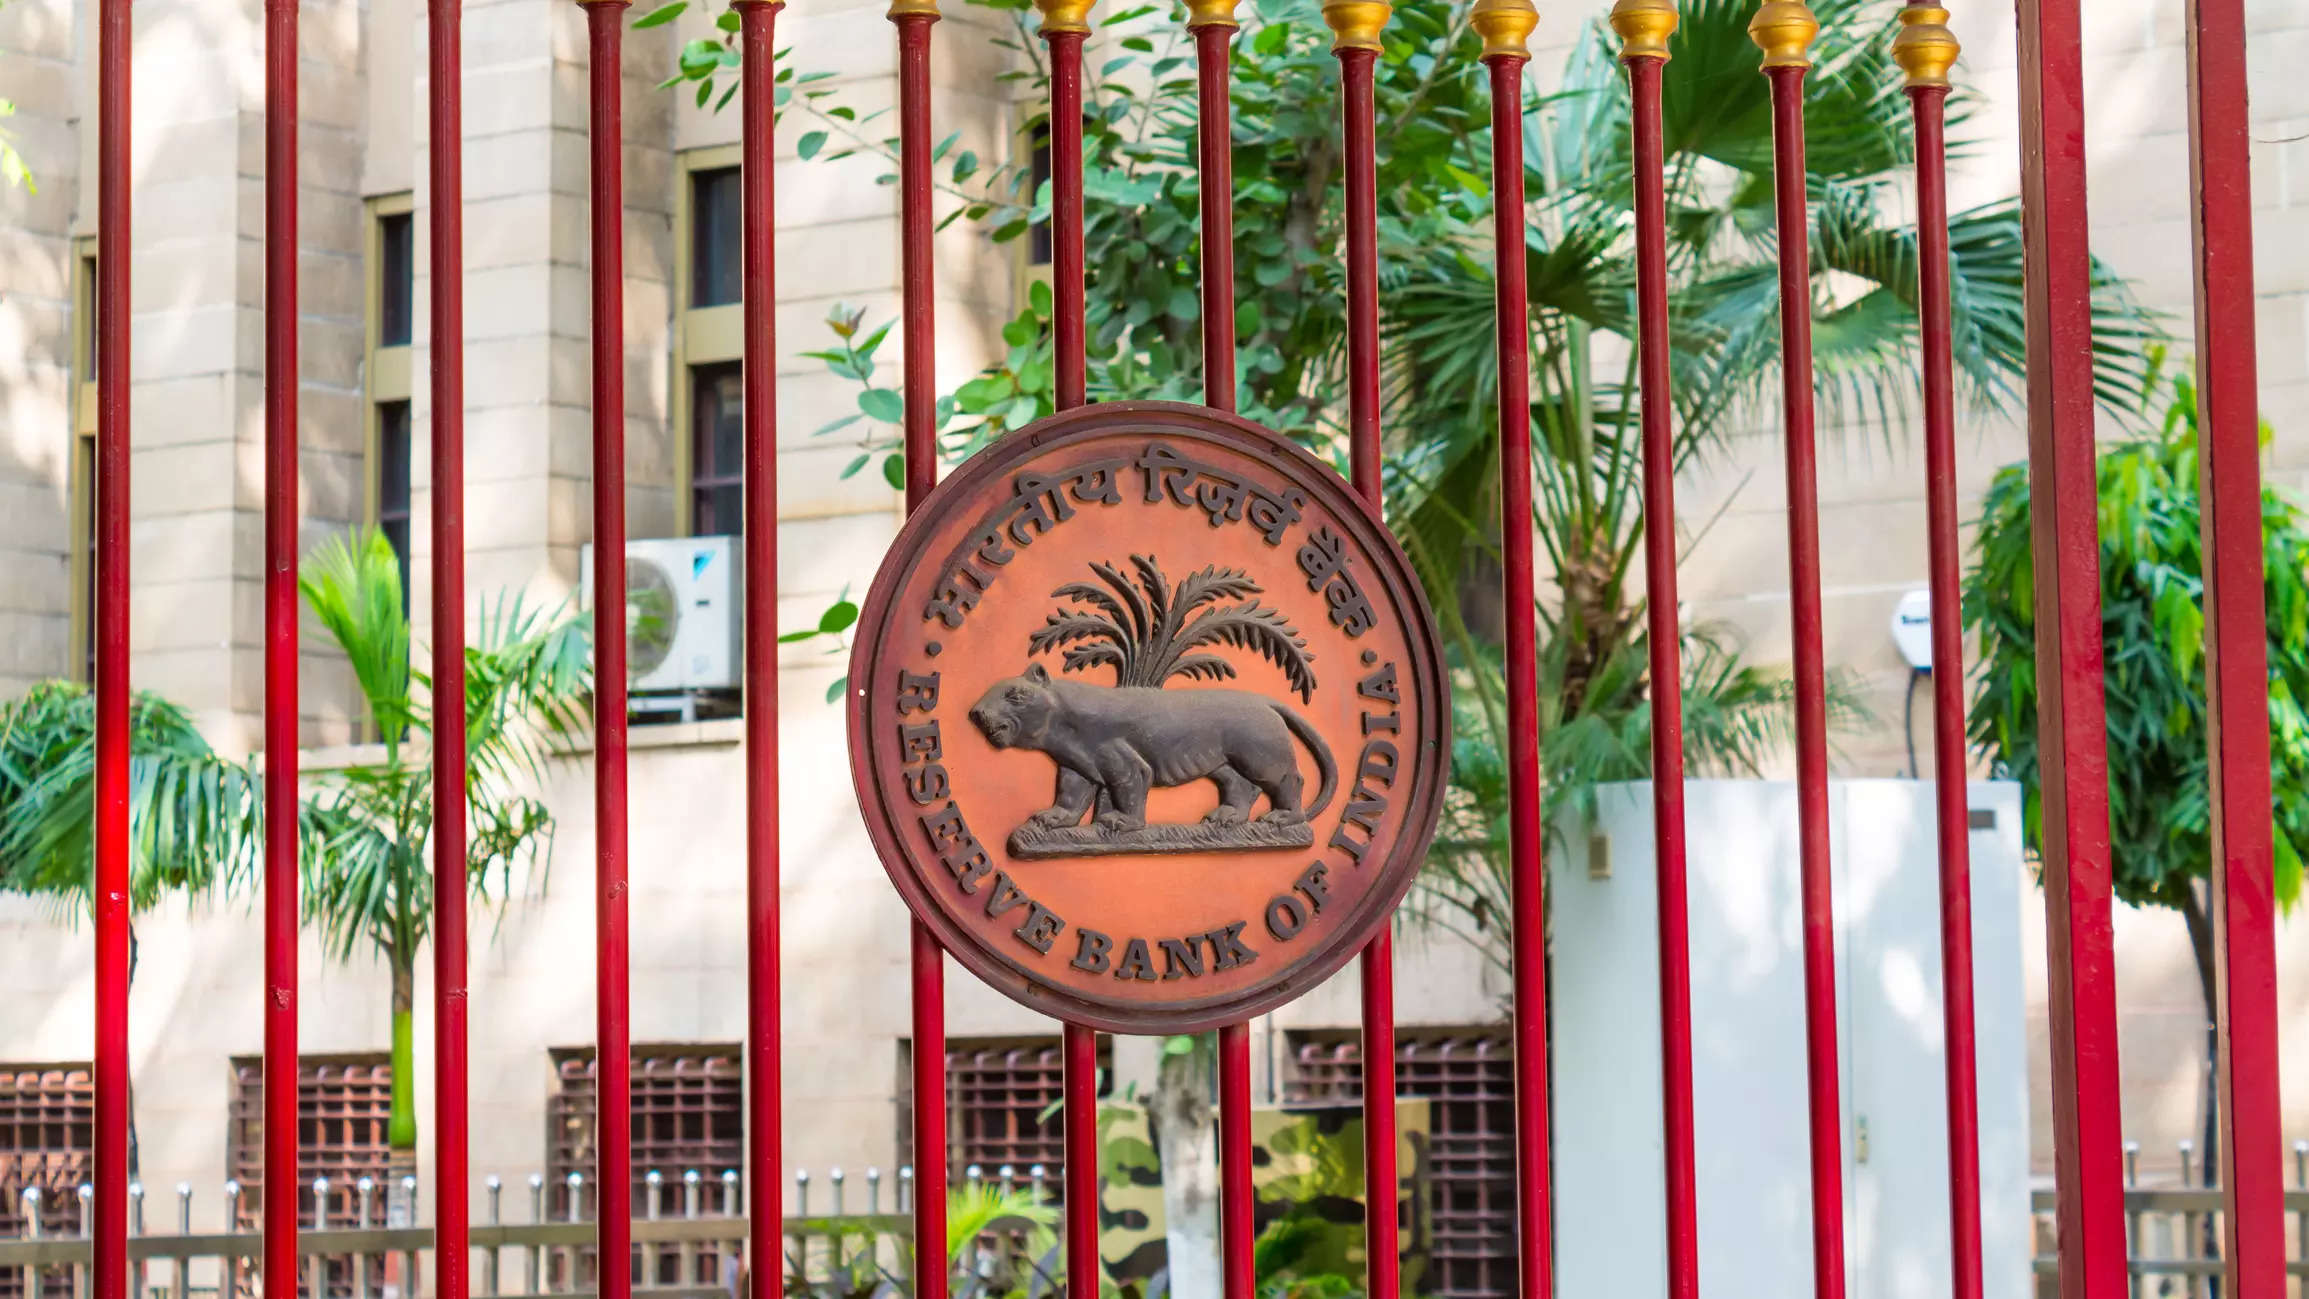 A Kotak Economic Research report said with uncertainty around the new Covid variant, the RBI would possibly wait for some clarity before moving decisively on rates.